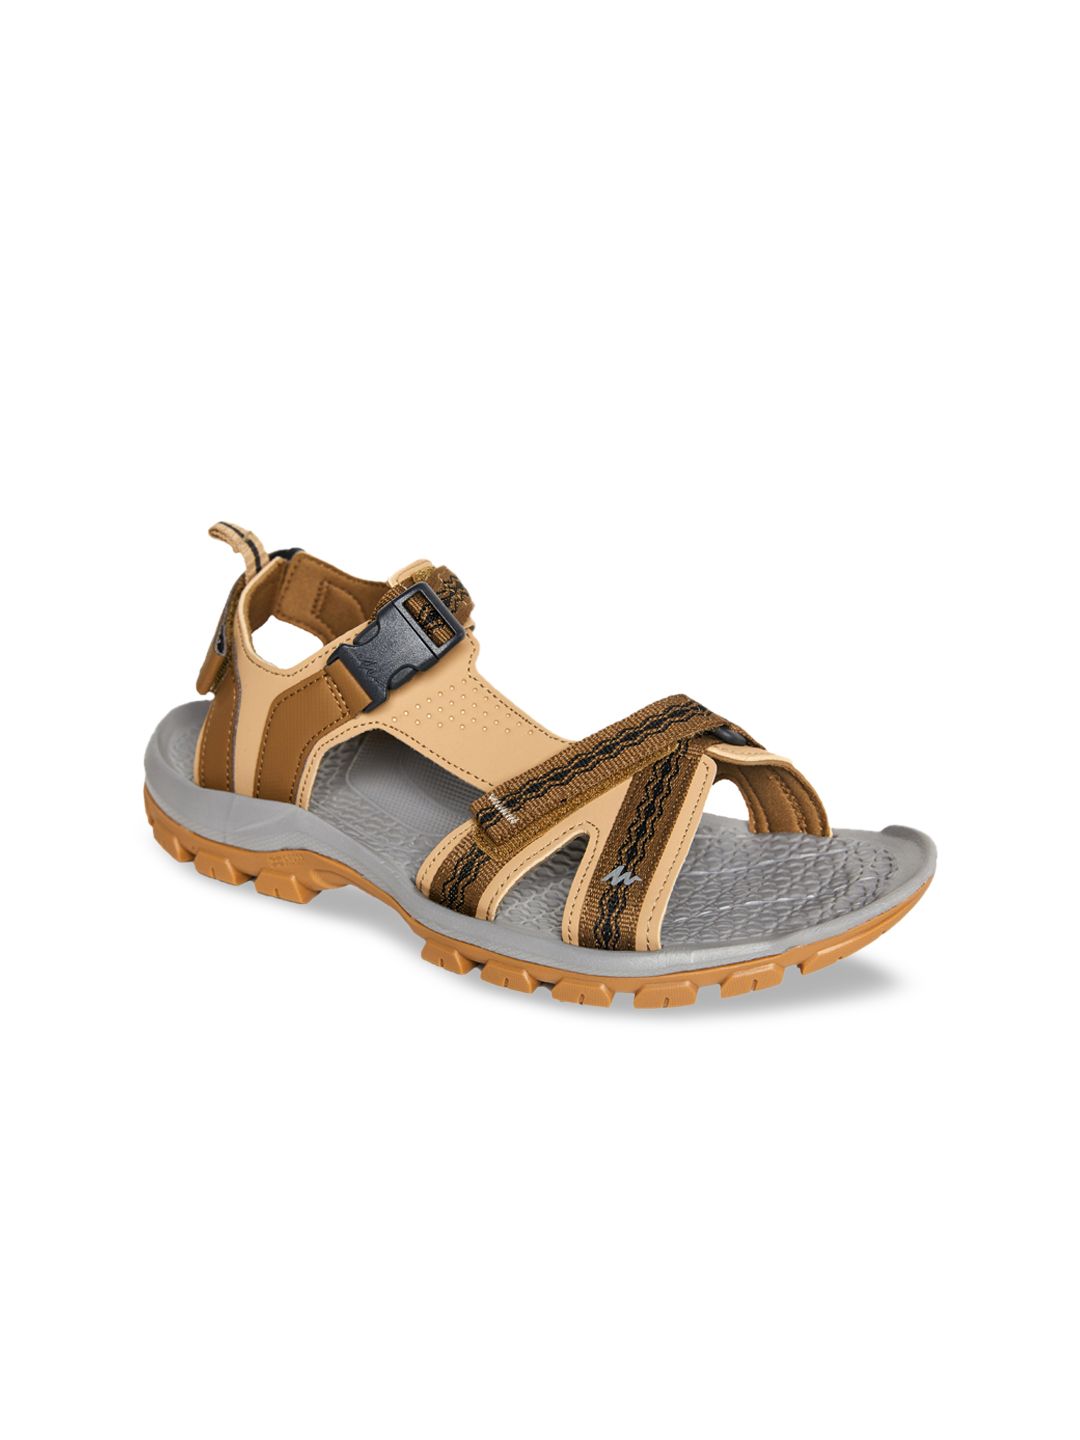 Quechua By Decathlon Unisex Beige & Grey Solid Sports Sandal Price in India